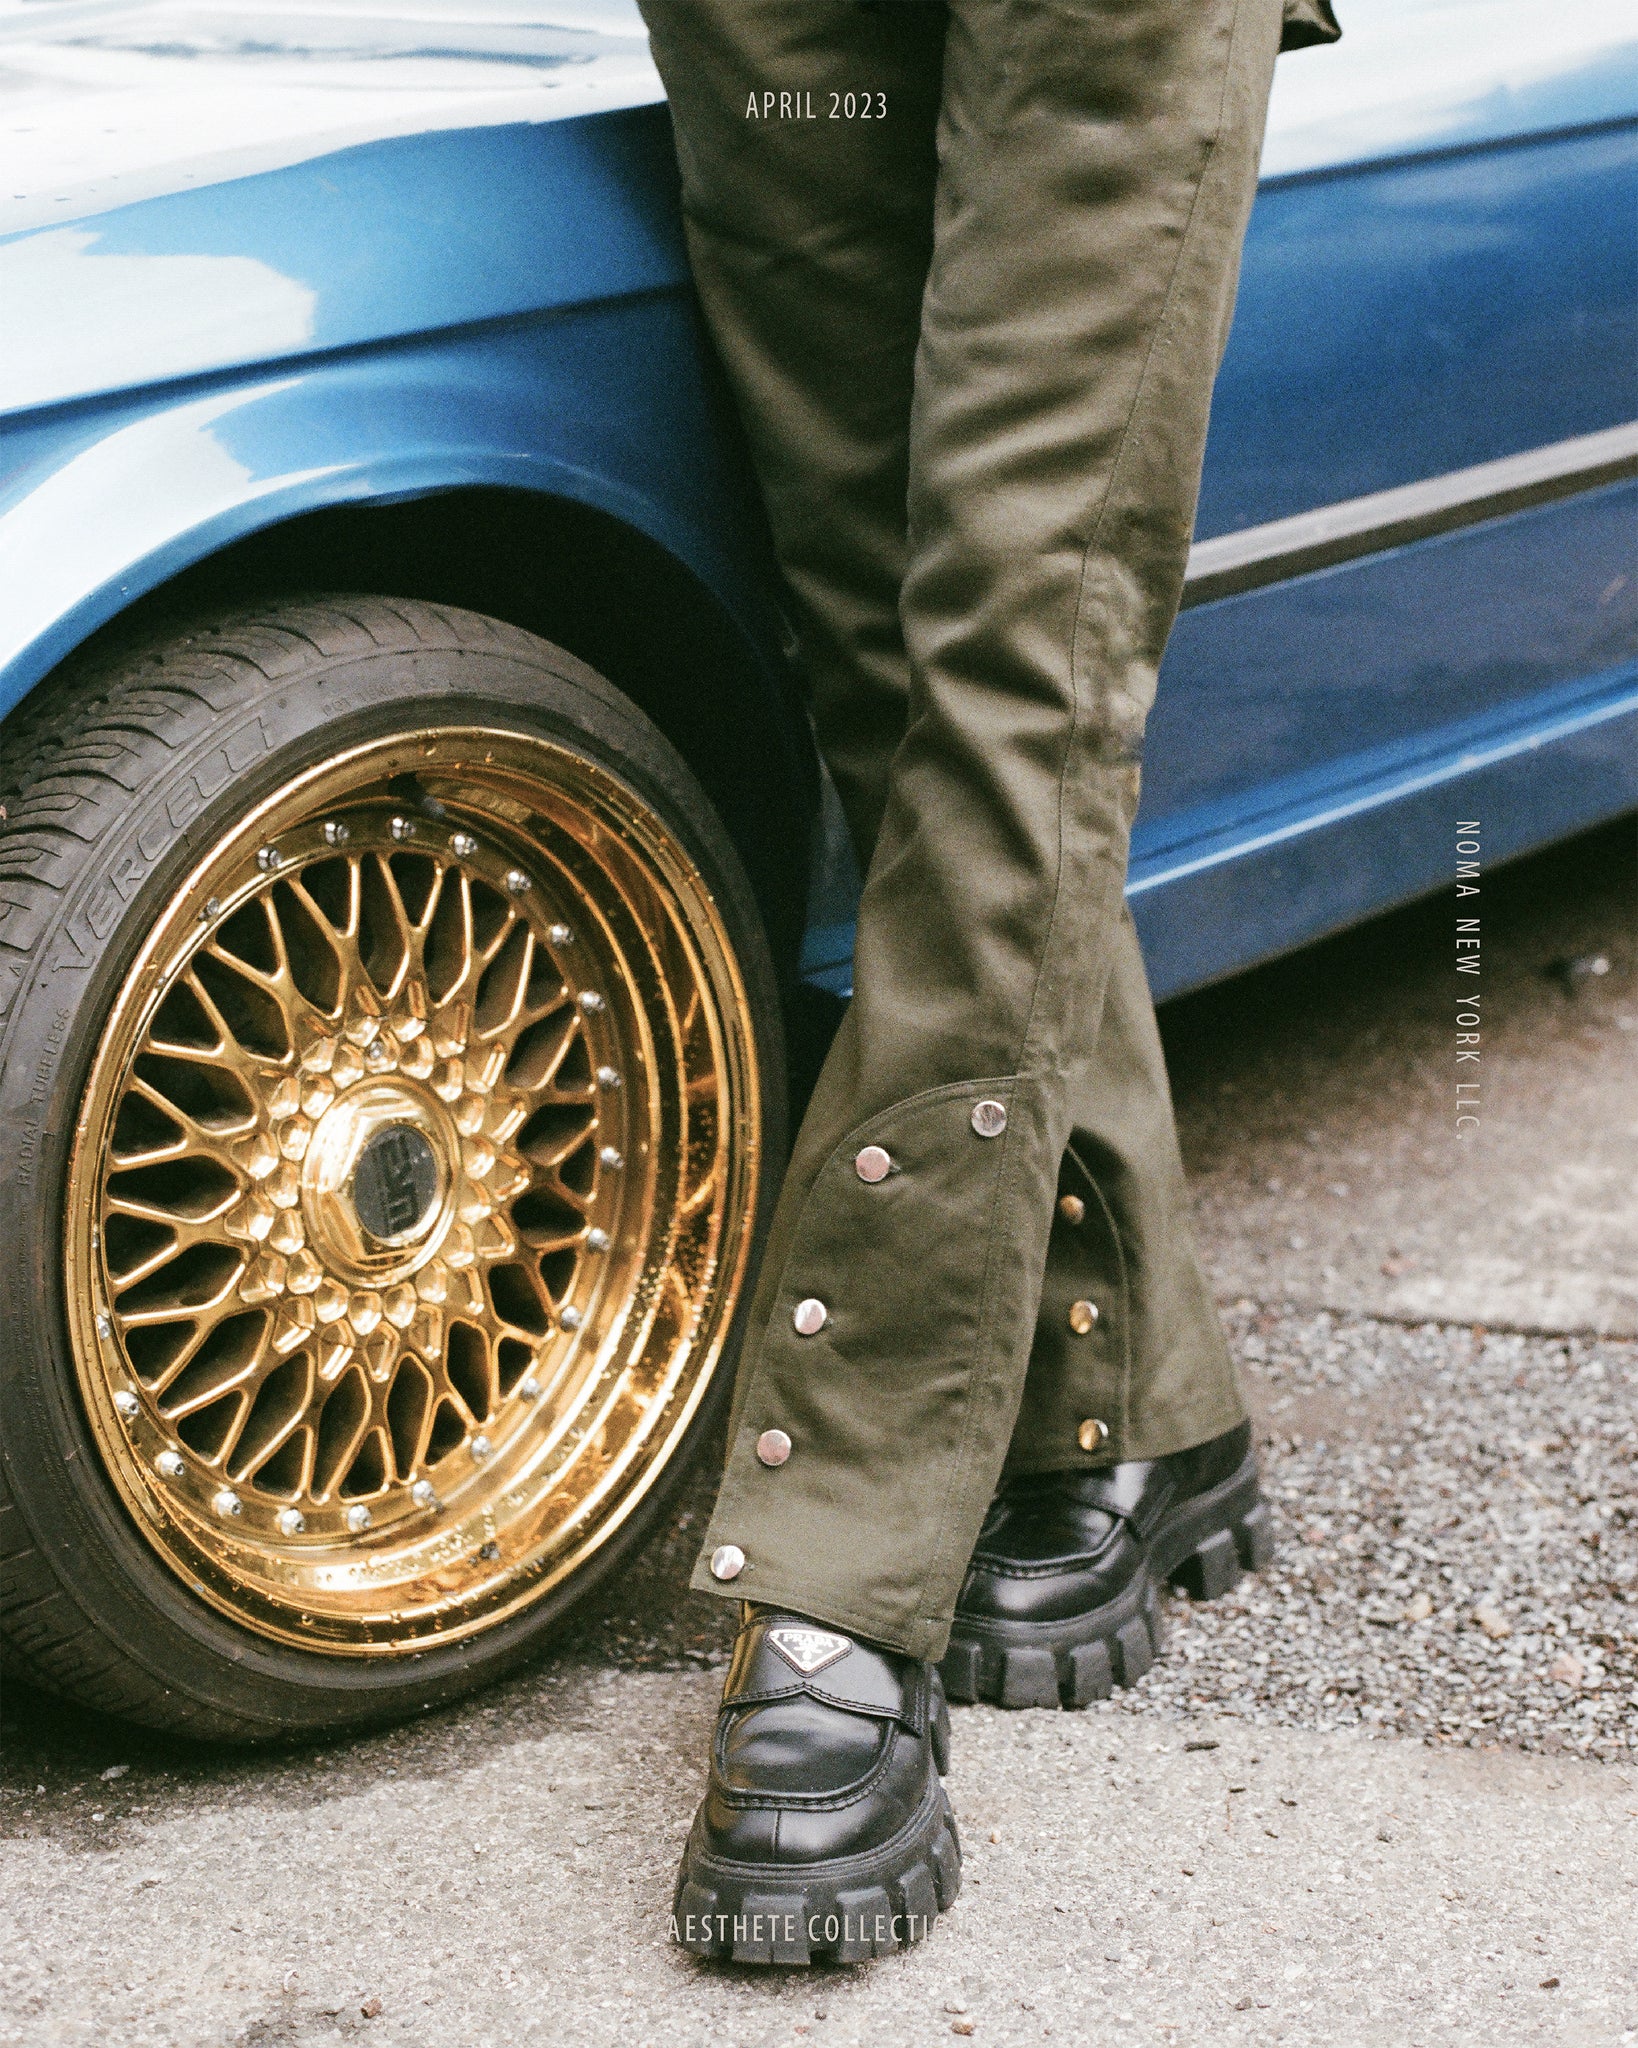 Article.009 Twill Field Pant 2.0